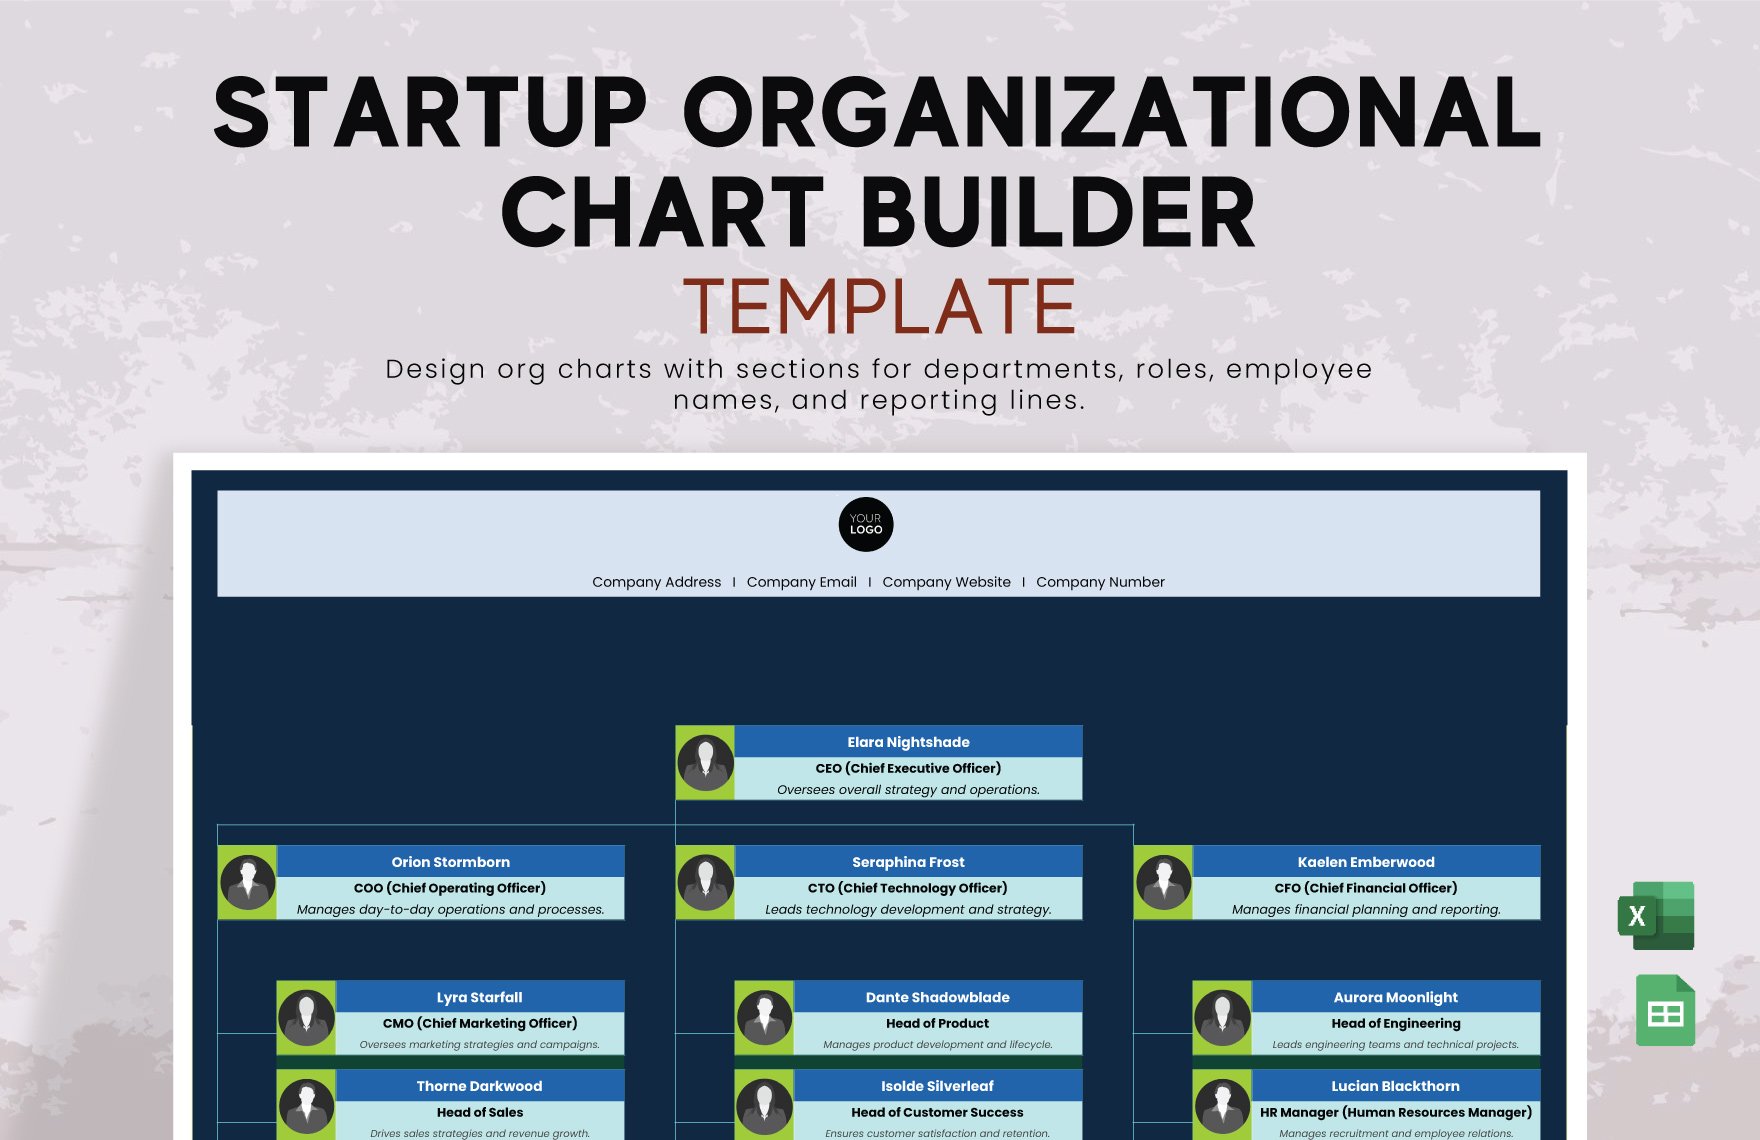 Startup Organizational Chart Builder Template in Excel, Google Sheets